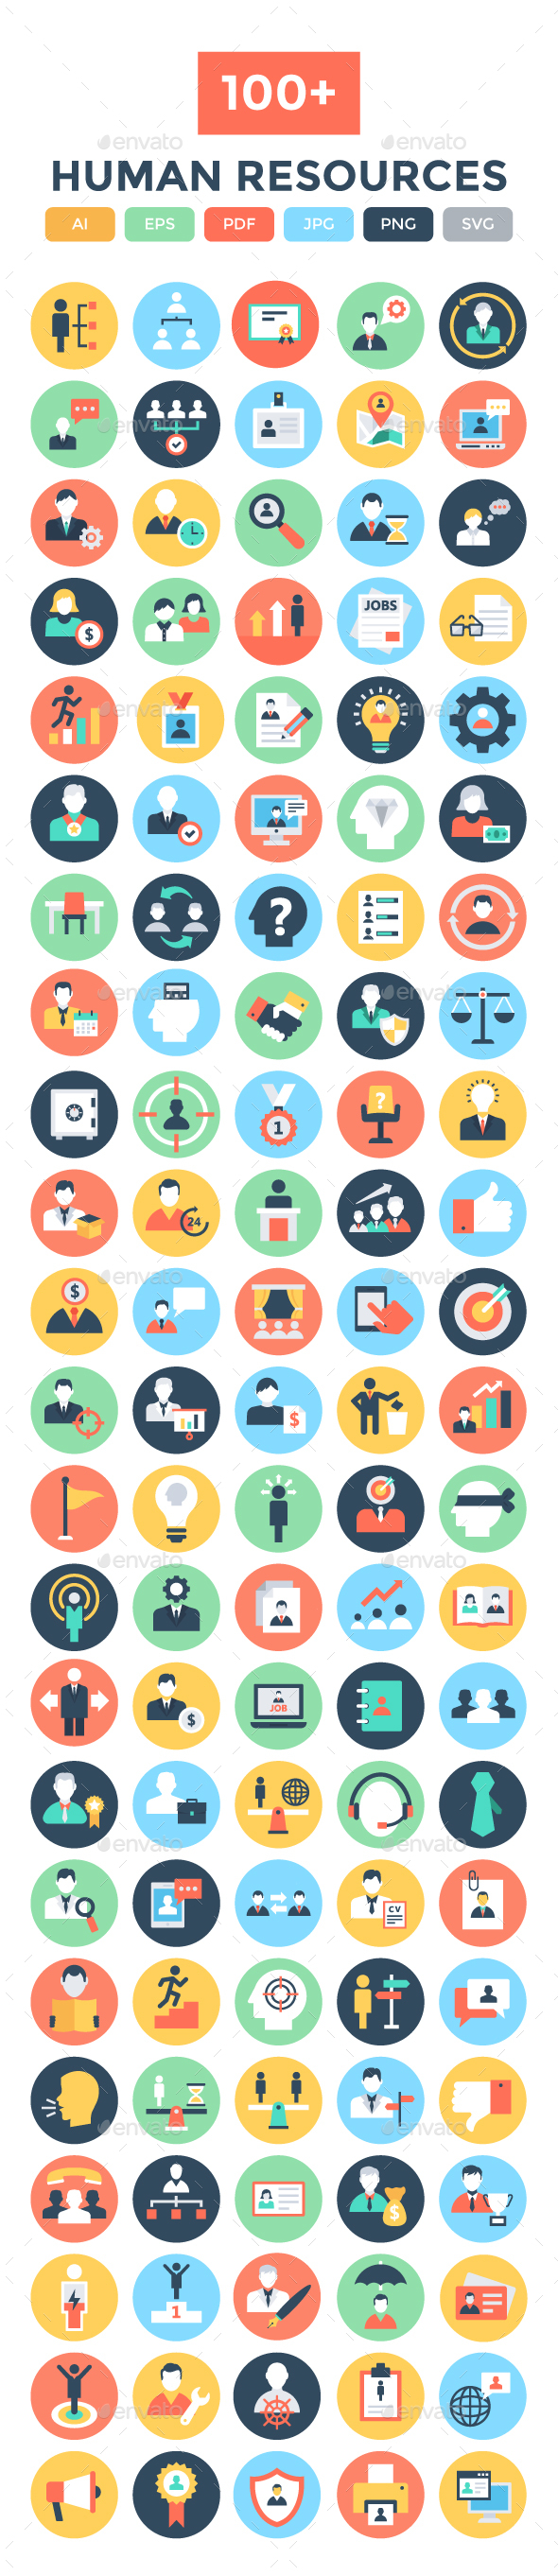 100+ Flat Human Resources Icons